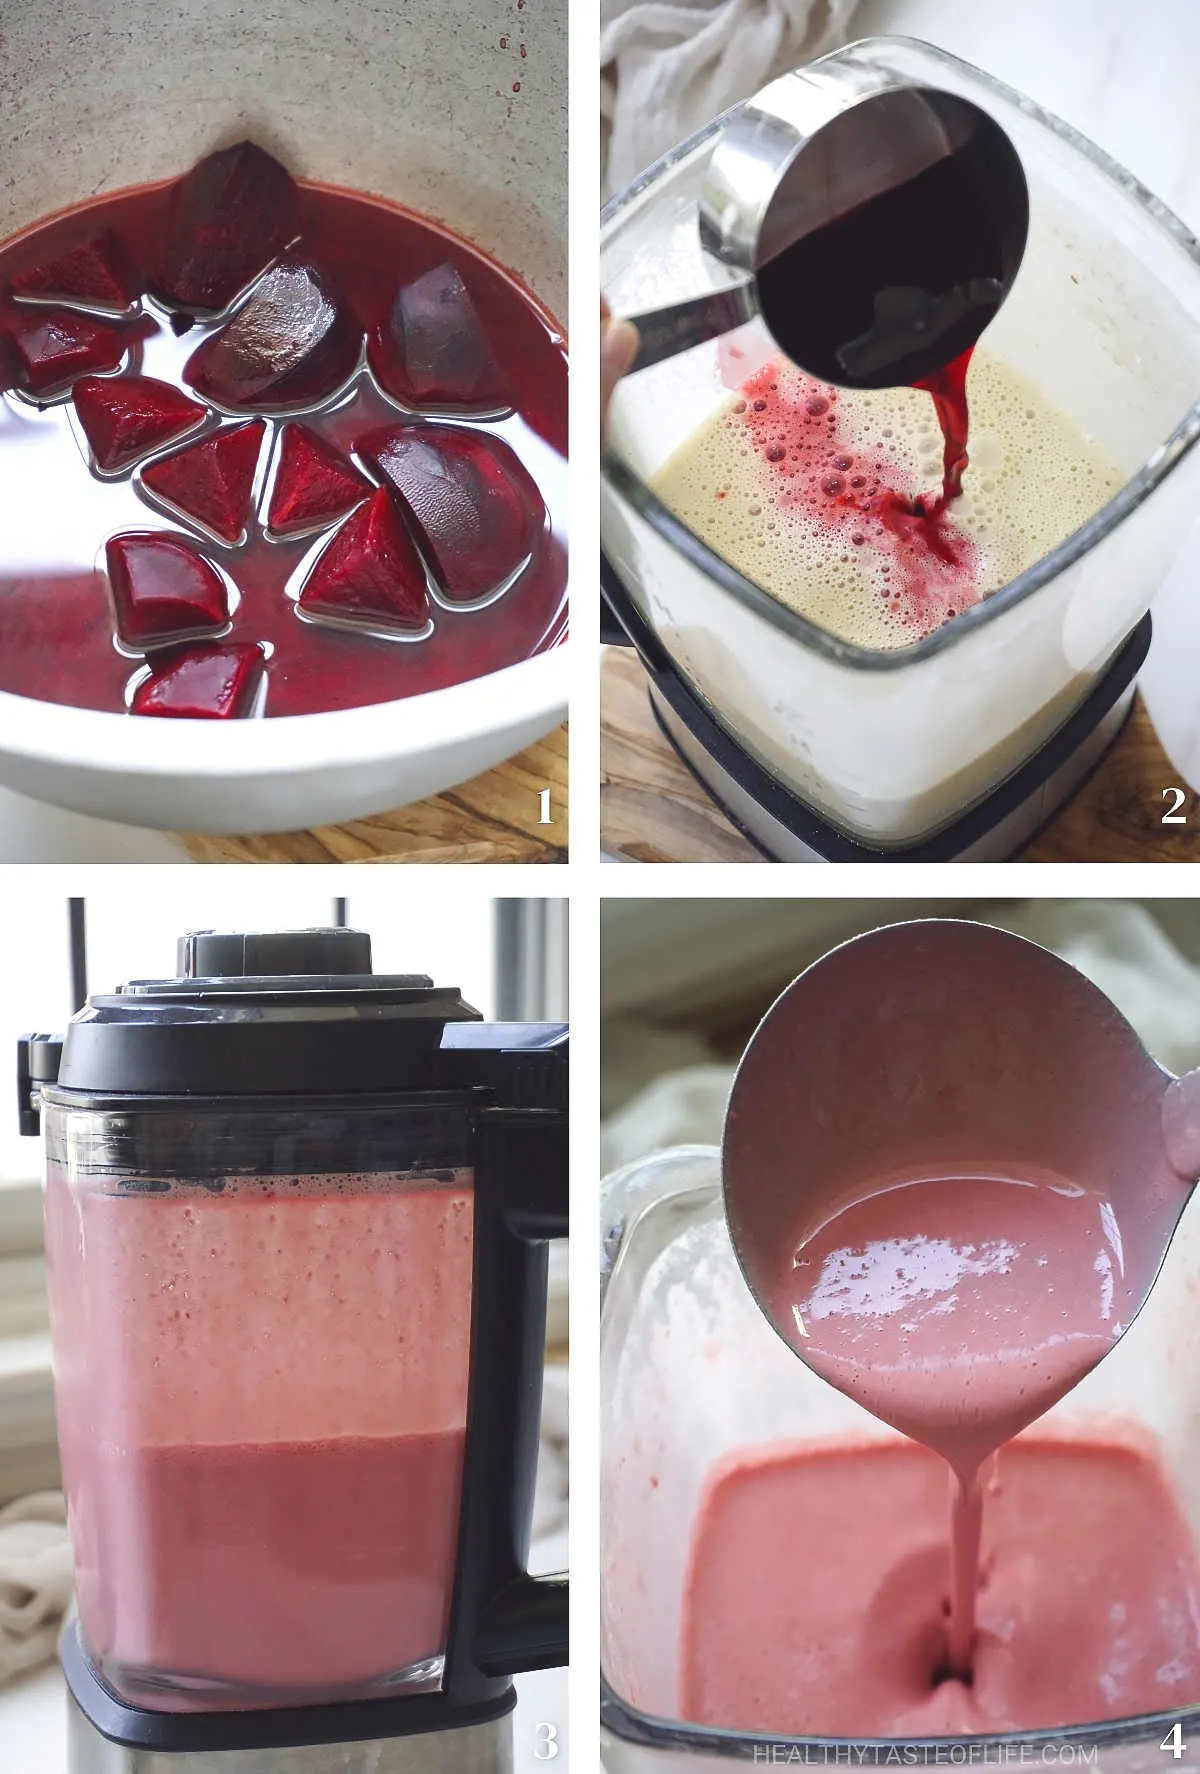 Process images showing how to make pink crepe batter for strawberry crepe cake.